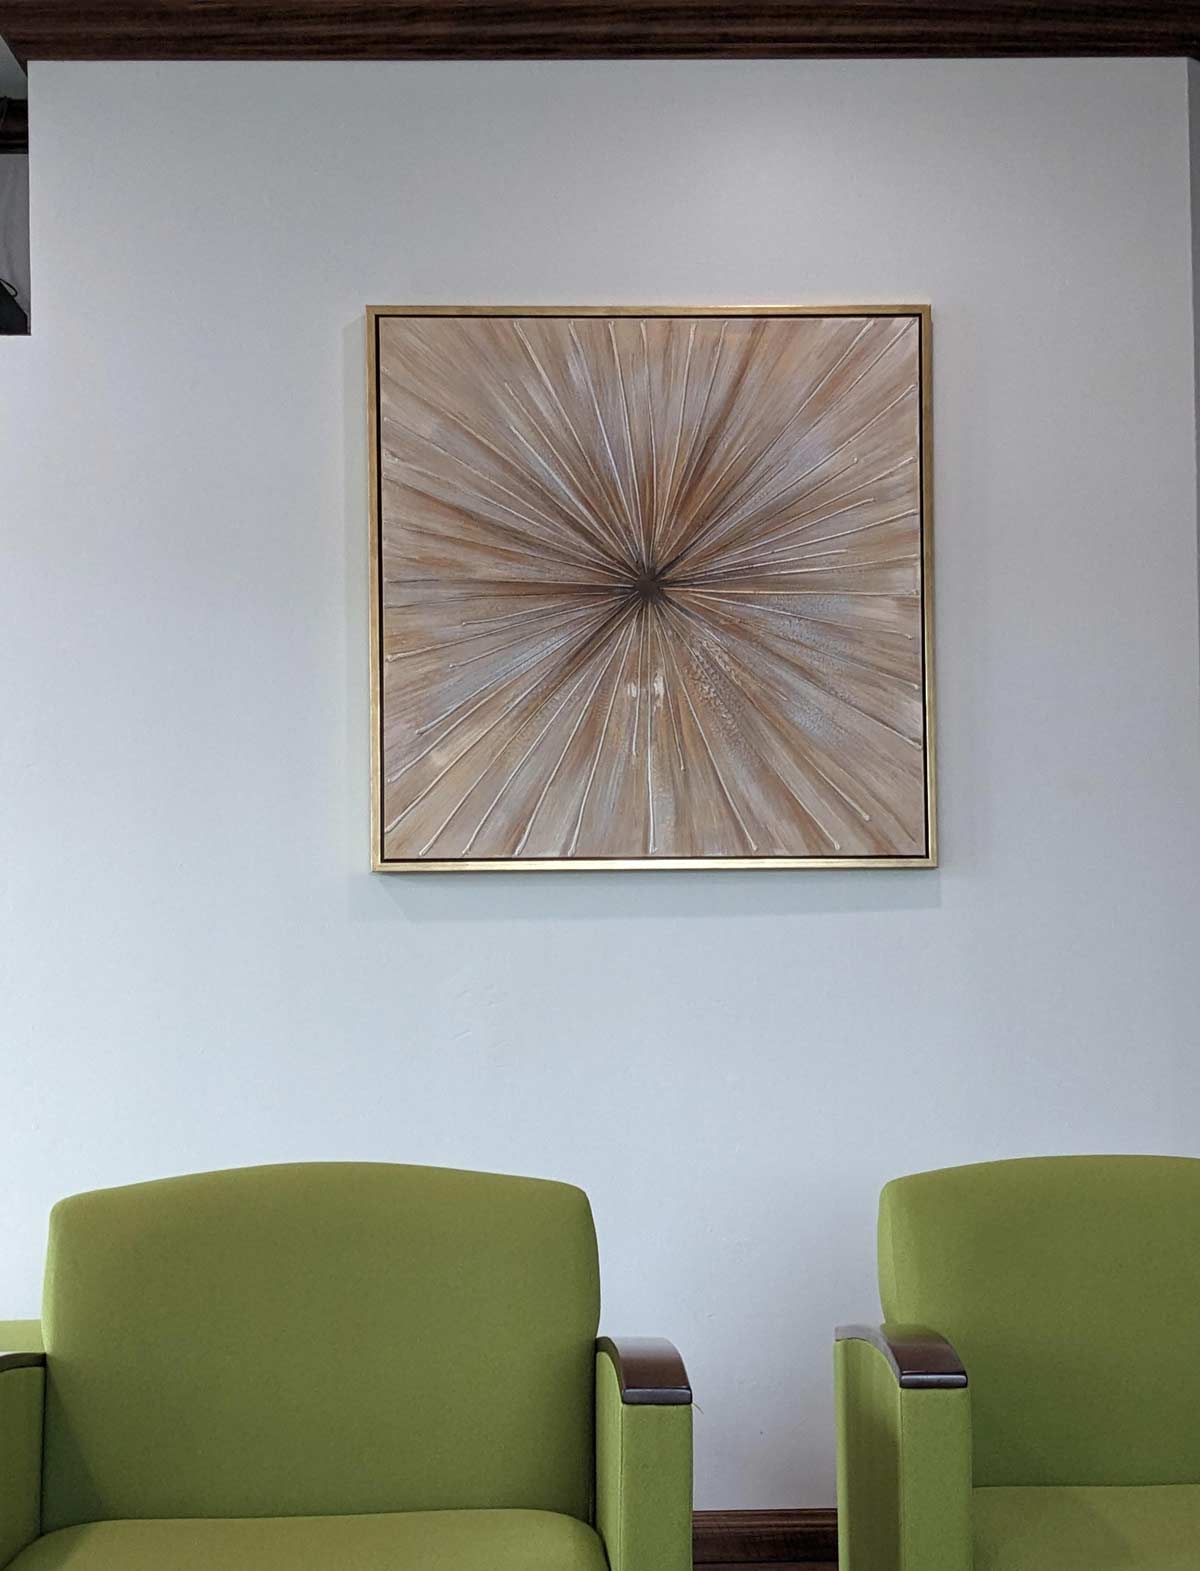 This picture in my dentist office looks like an anus